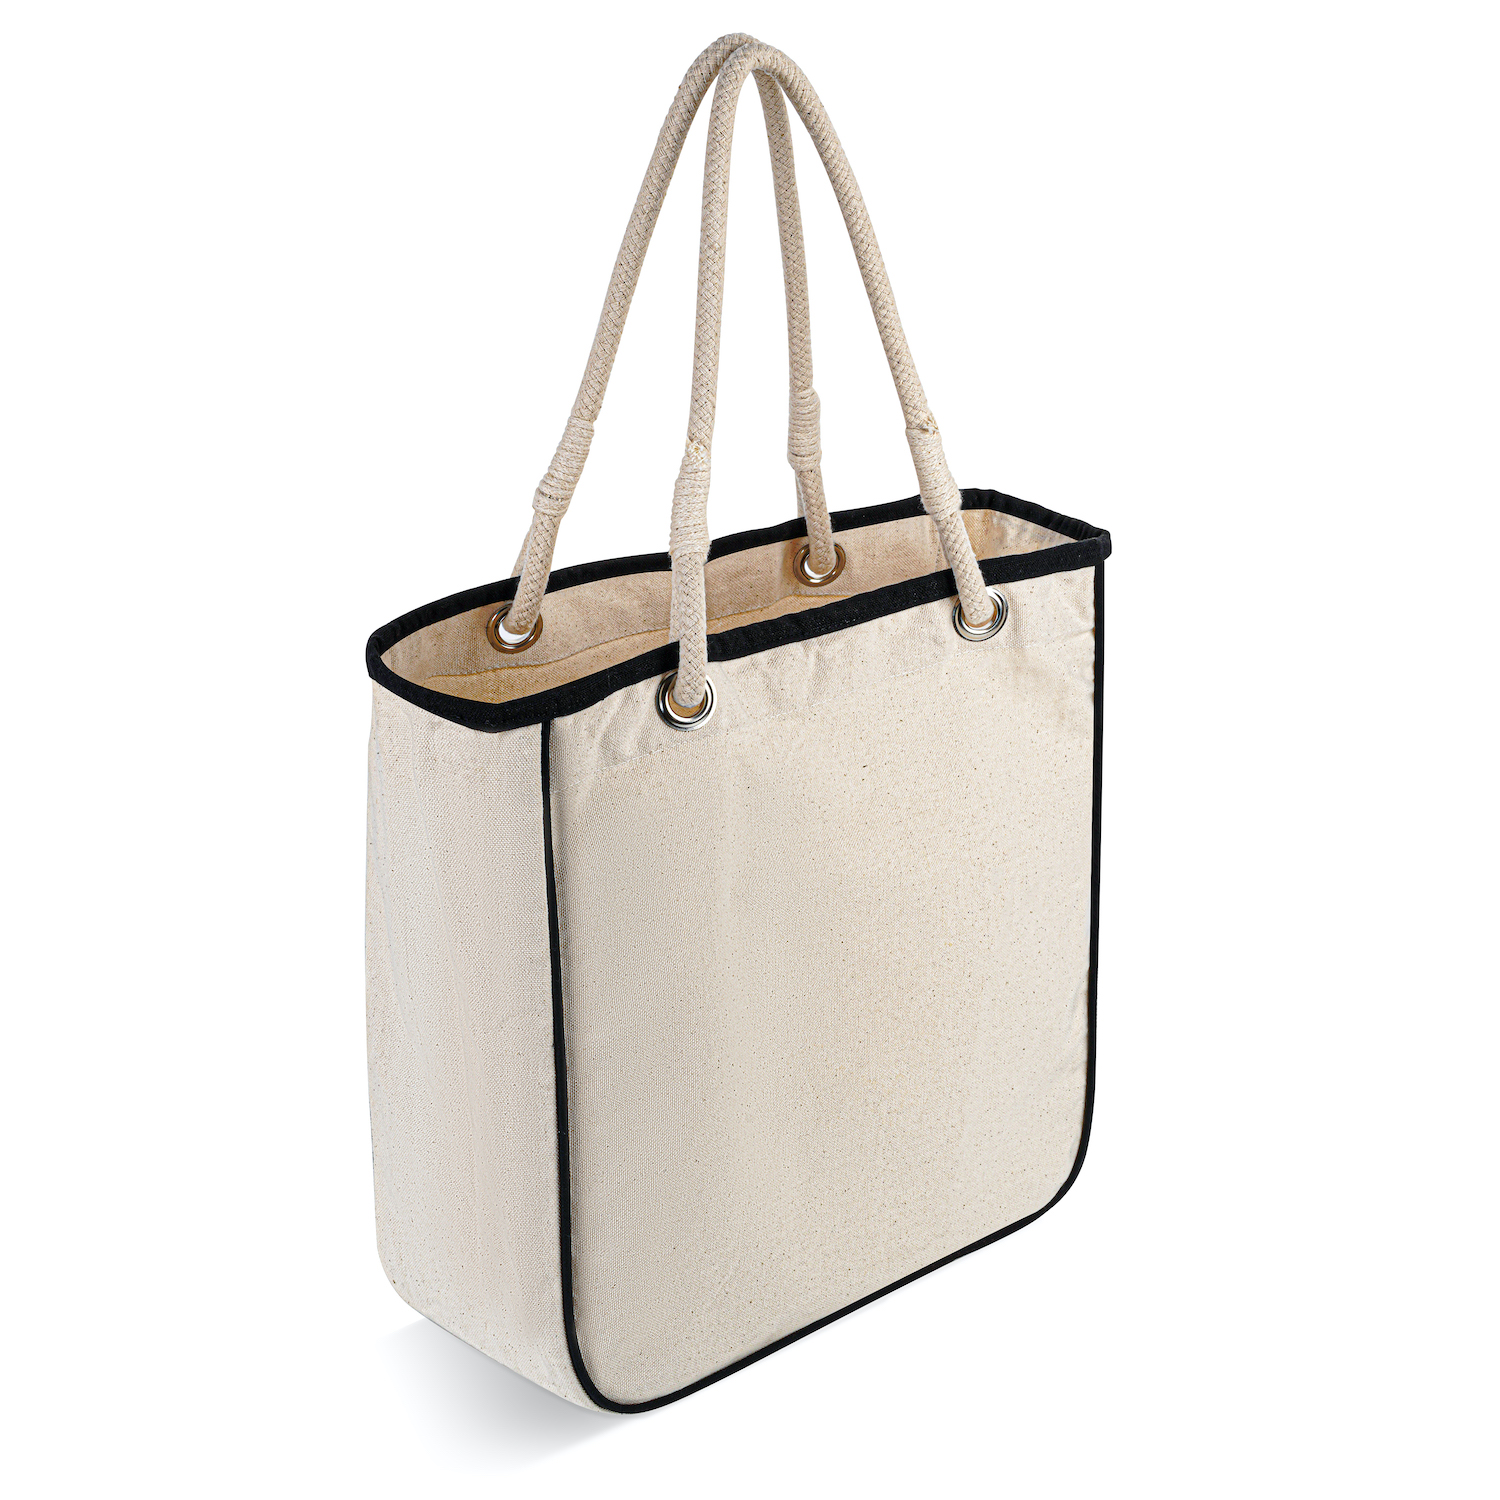 The Benefits of Using Jute Bags for Your Business Cost-Effective, Durable, and Eco-Friendly